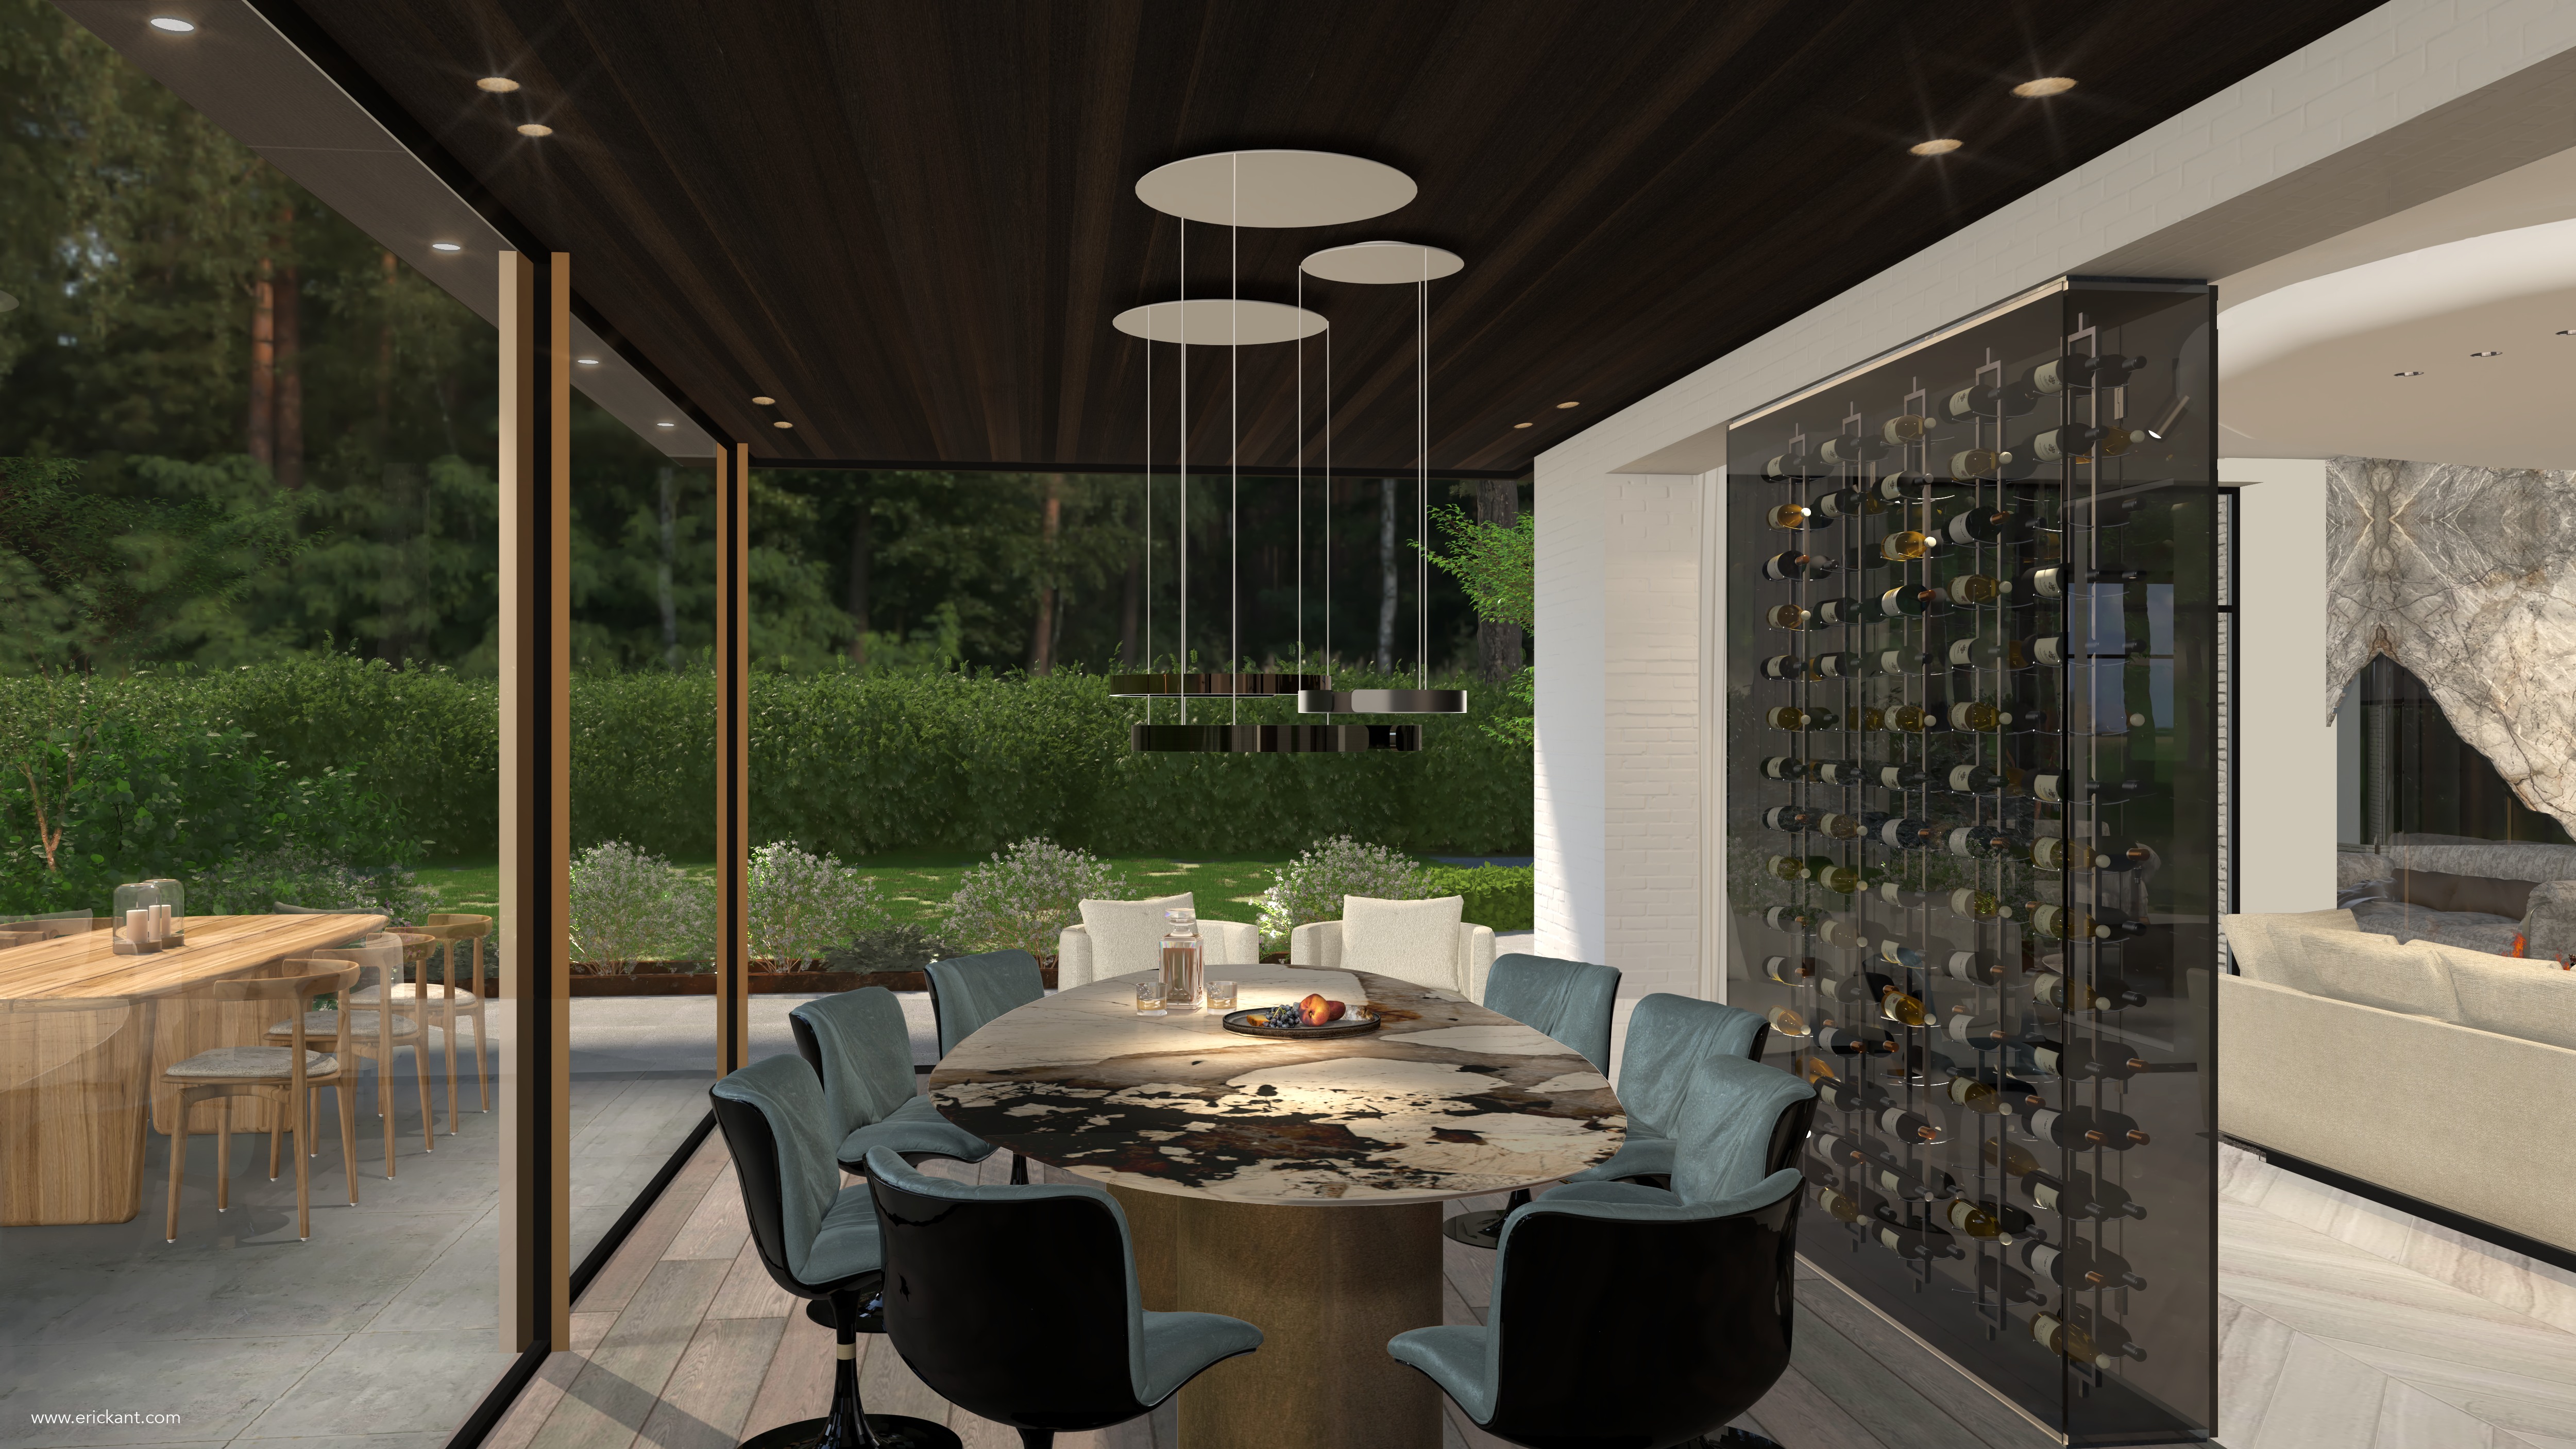 Luxury-Renovation-Diner-Dining-Eric-Kant.png